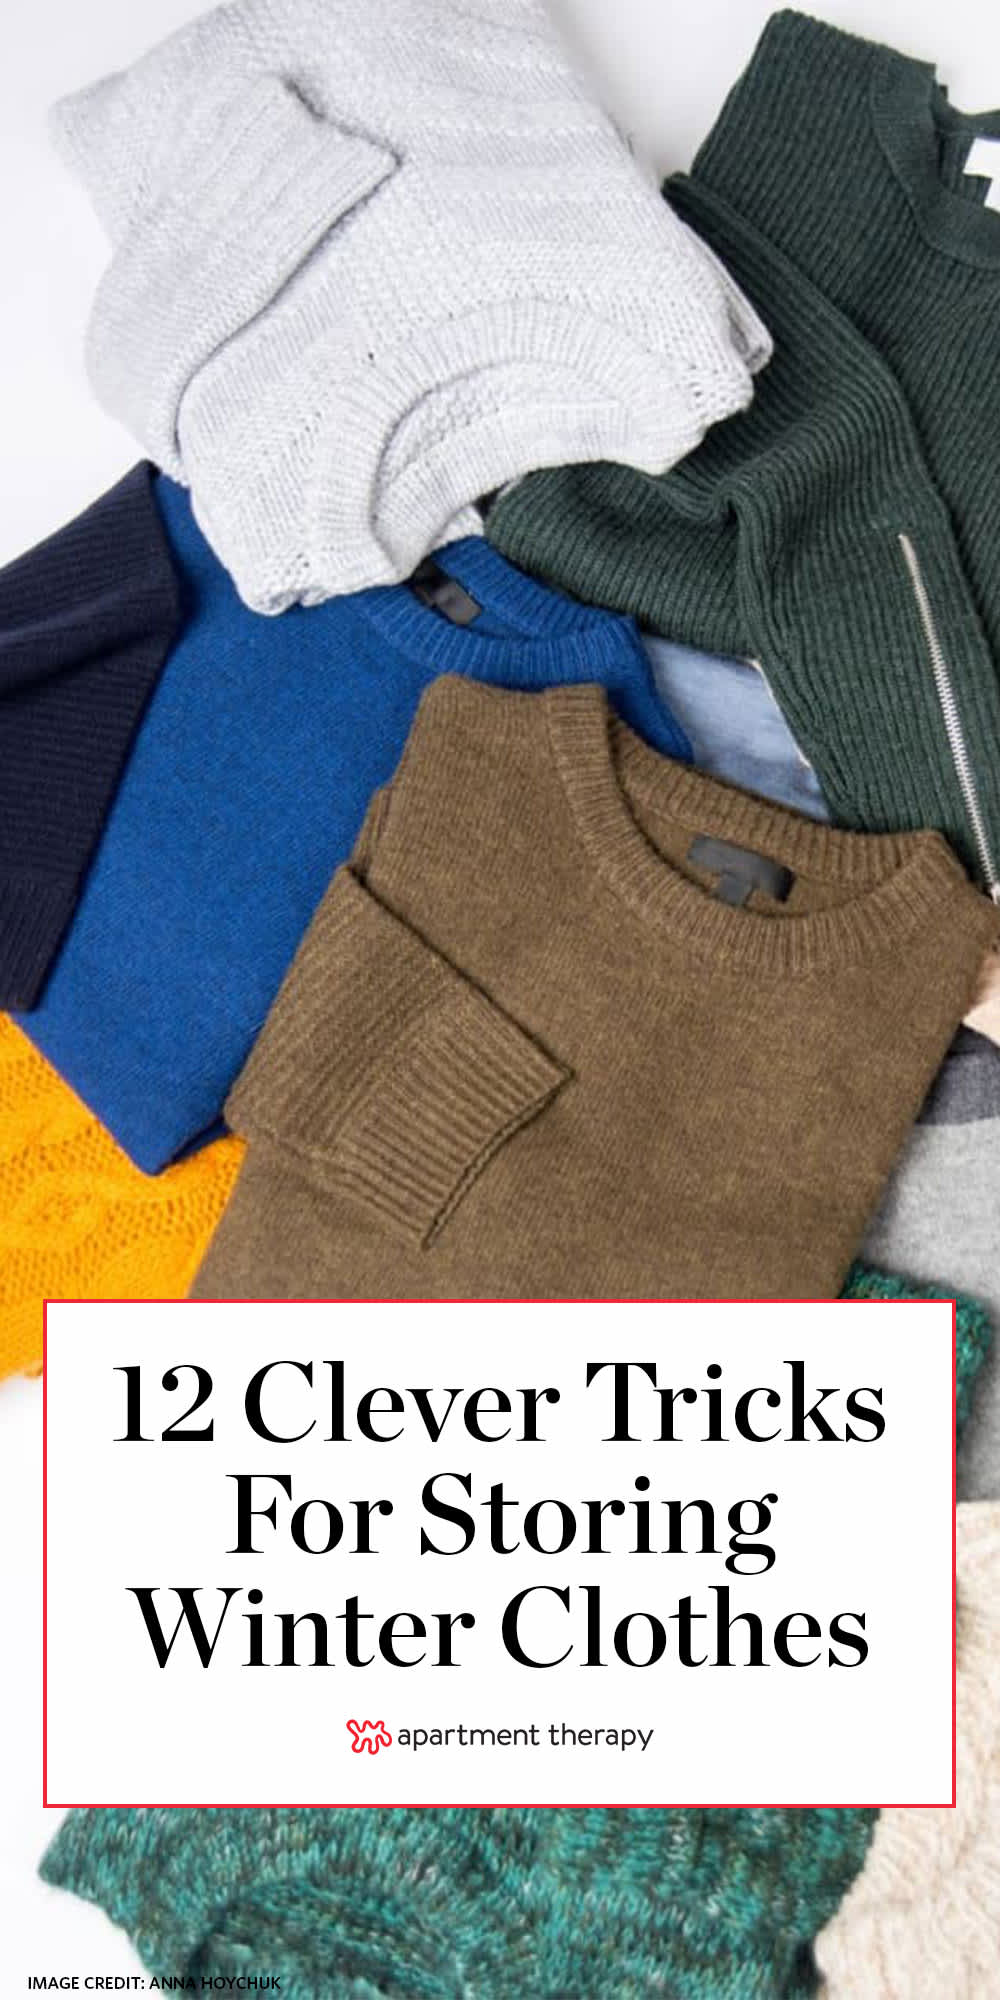 5 tips for safely storing your woolen clothes